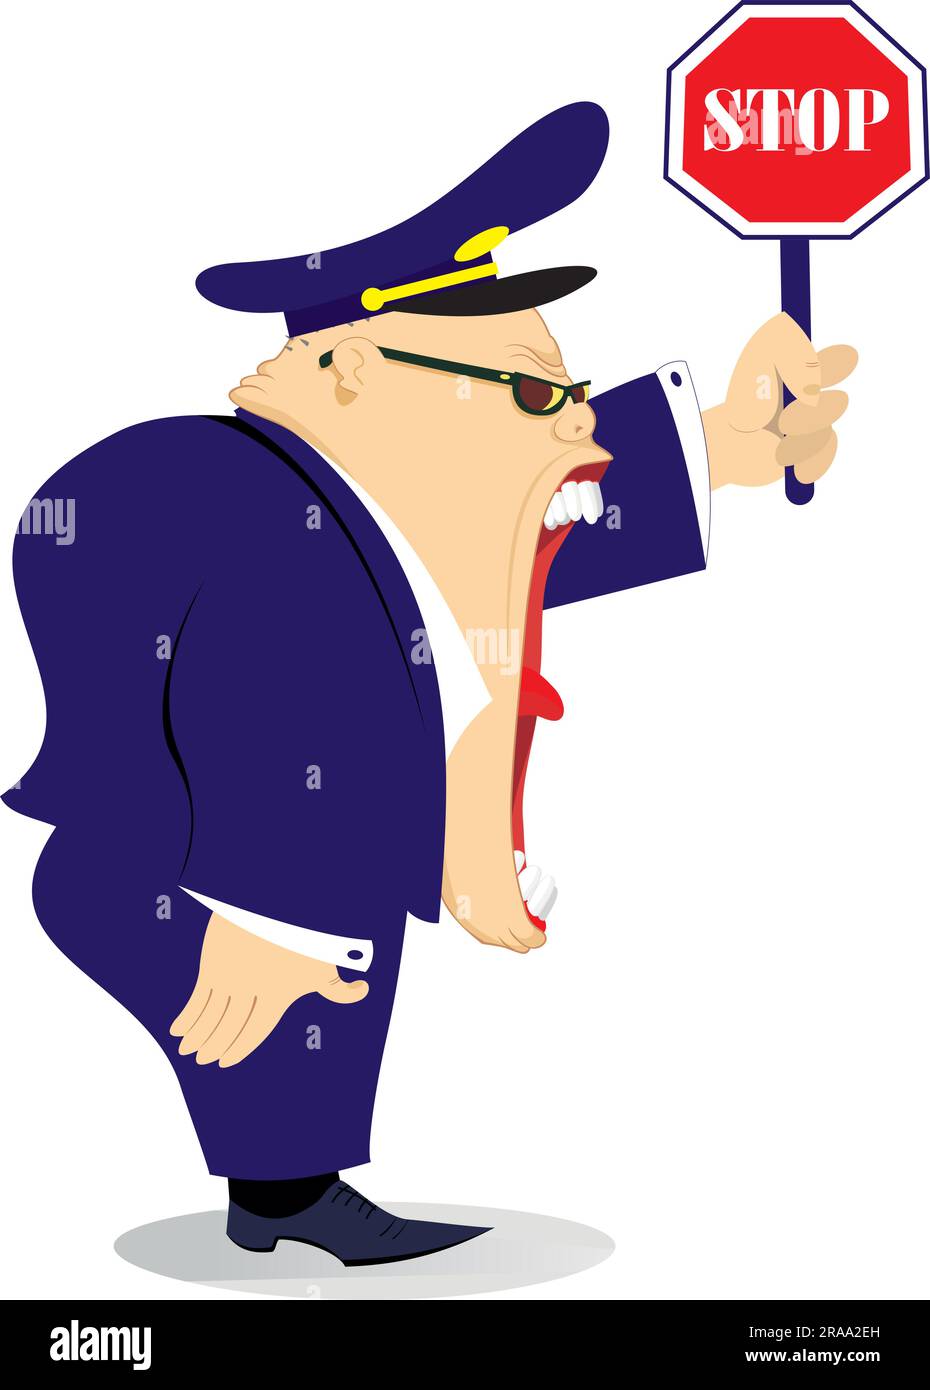 Premium Vector  Traffic police holding sign stop and go illustration.